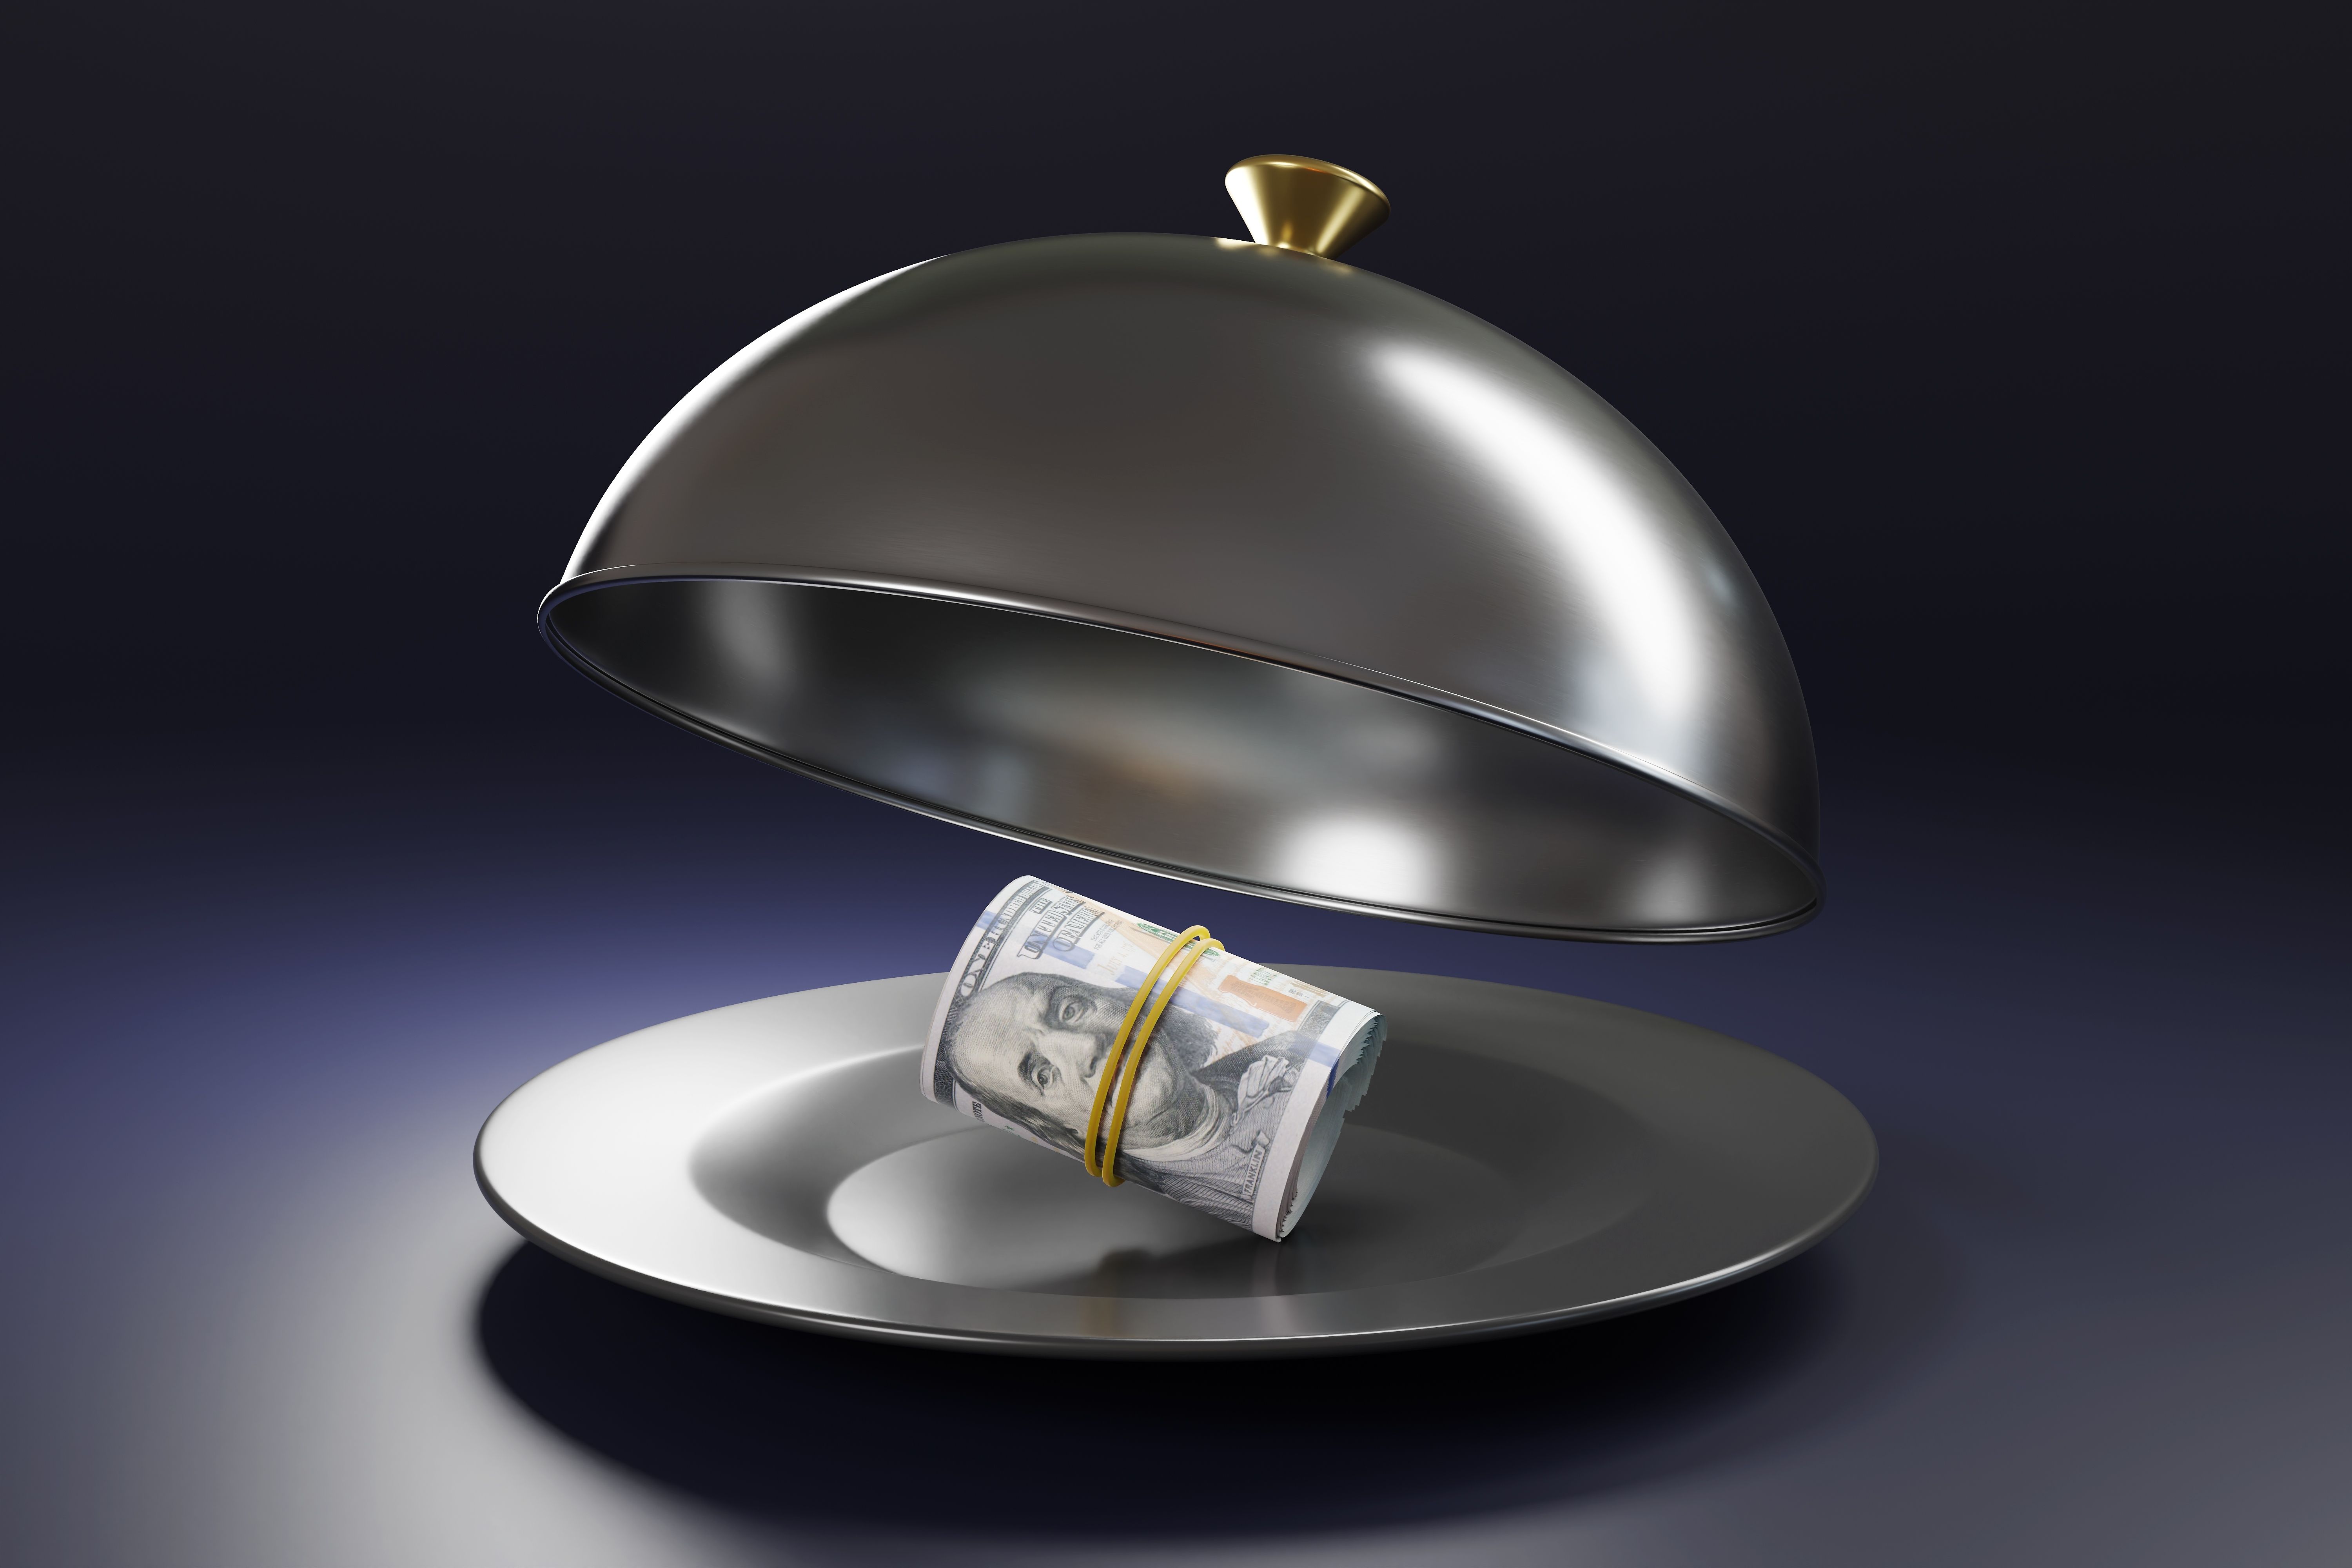 US bankroll on a black plate covered by a silver metal cloche on dark purple background. 3D illustration of the concept of fine dining and middle class gourmet